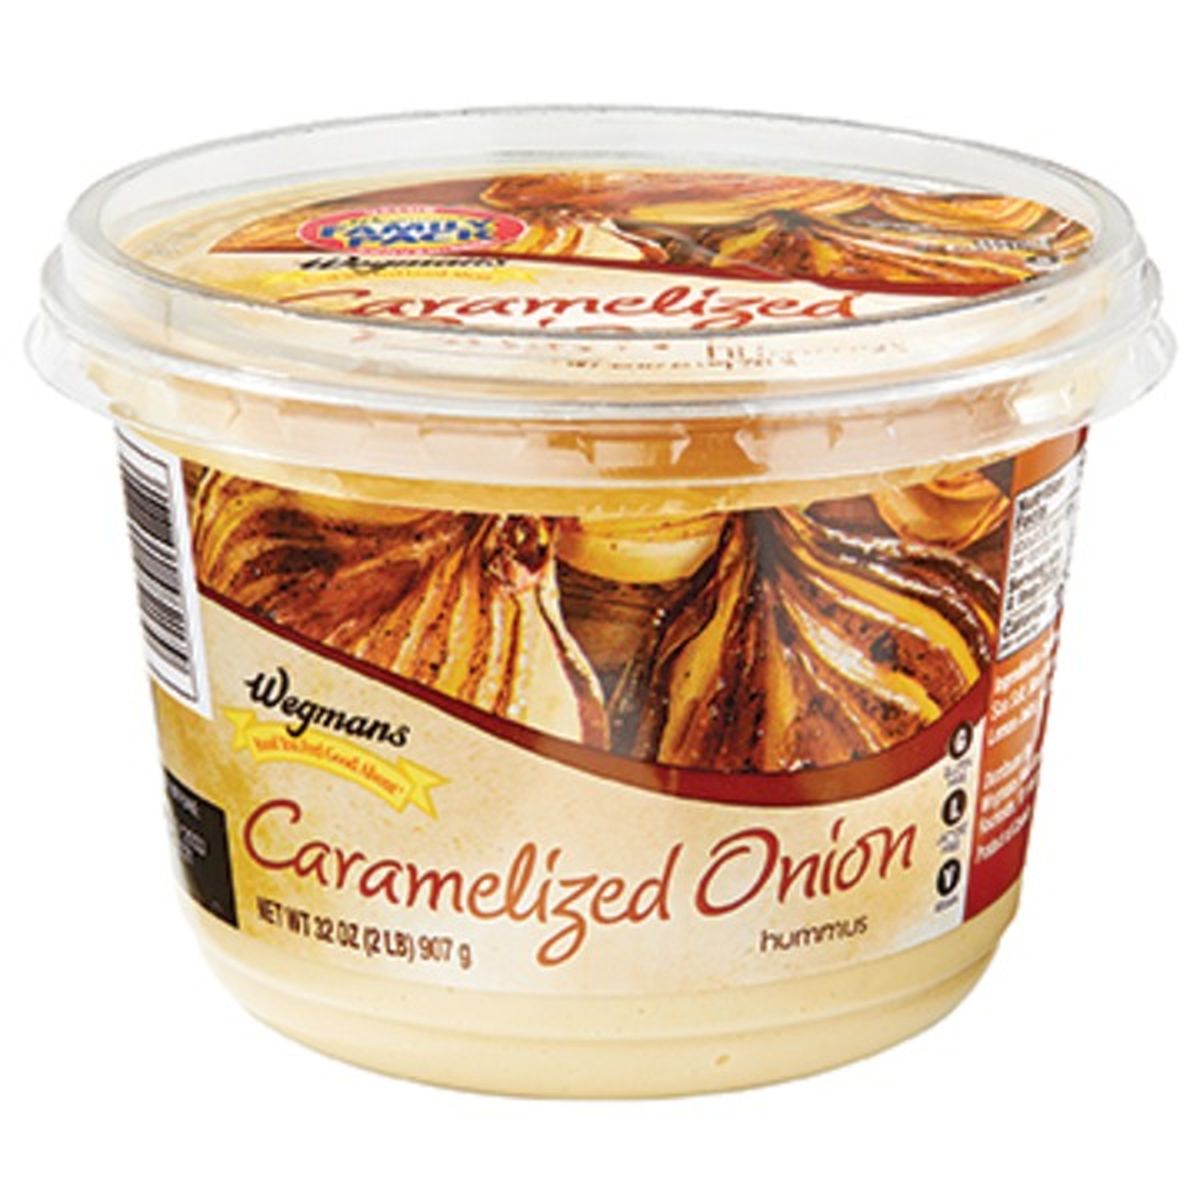 Calories in Wegmans Caramelized Onion Hummus, FAMILY PACK